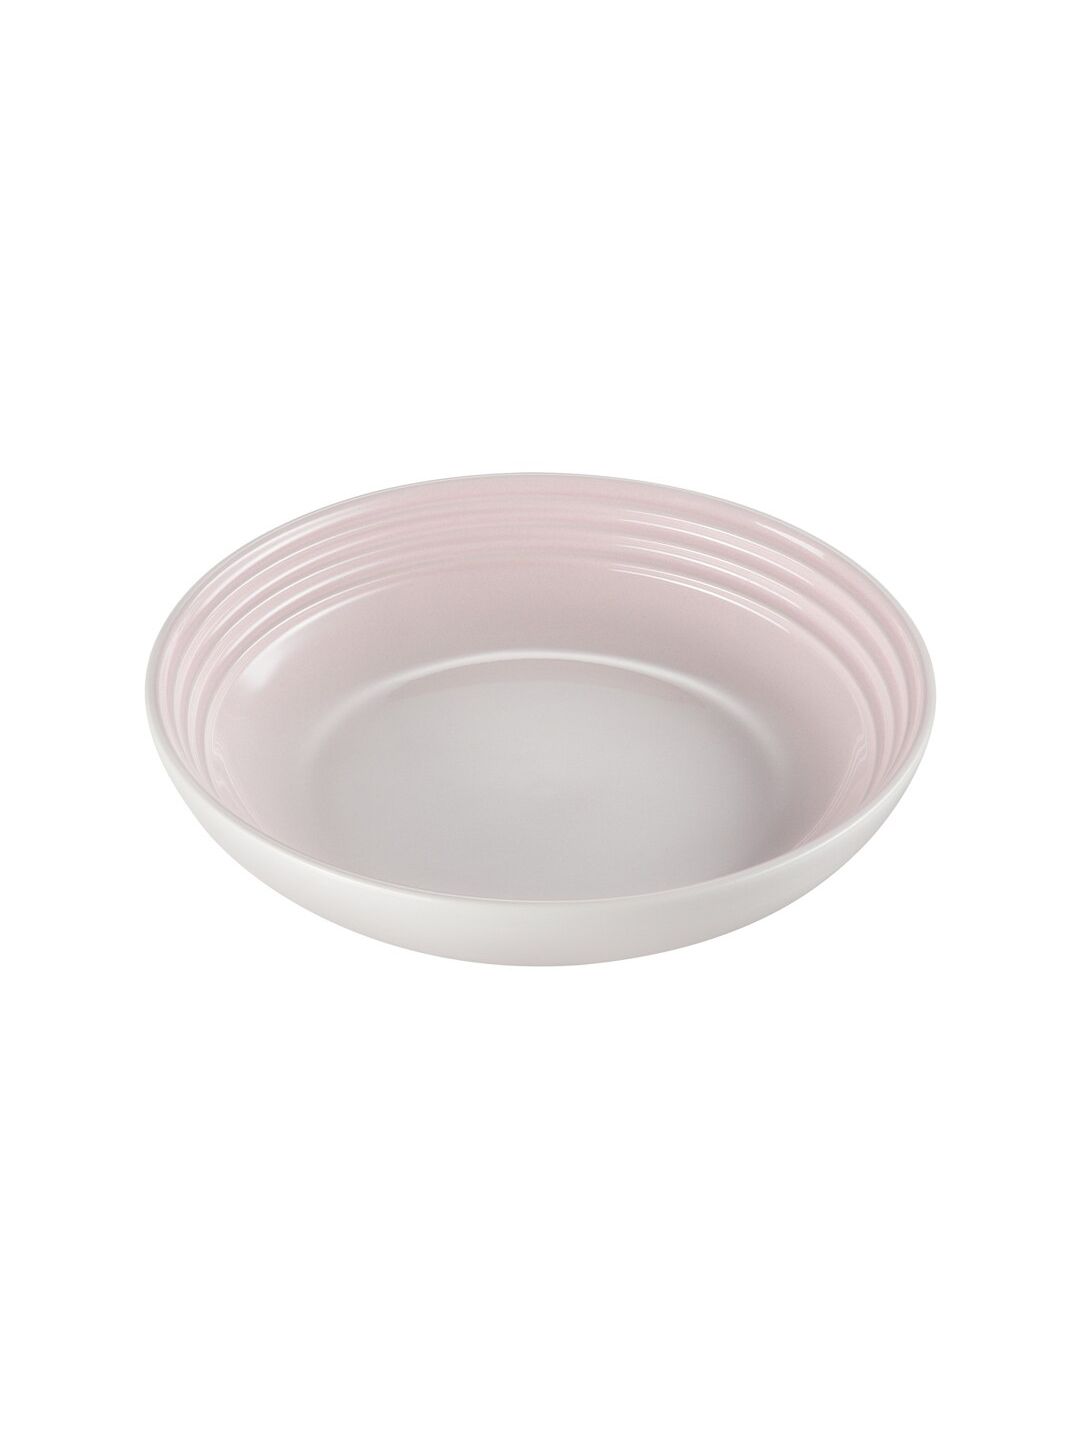 LE CREUSET Pink Pasta Bowl Price in India